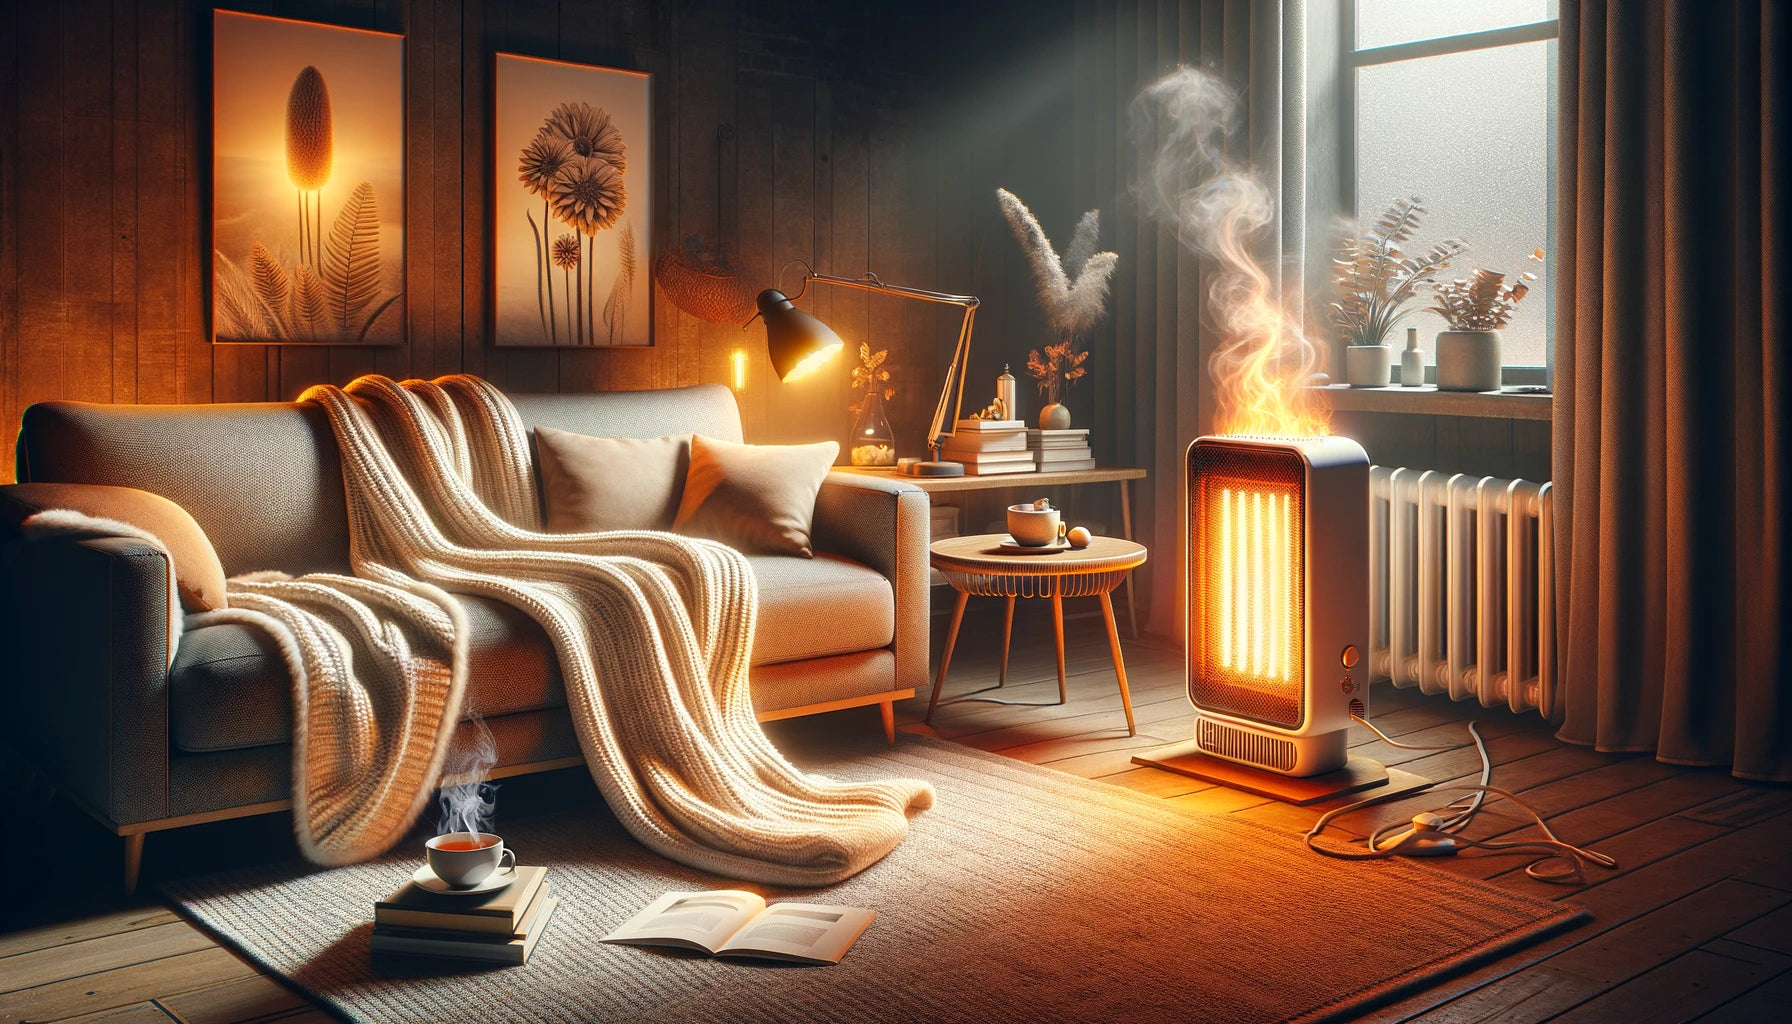 Electric Blanket vs Space Heater: Which is Best for Your Winter Warmth